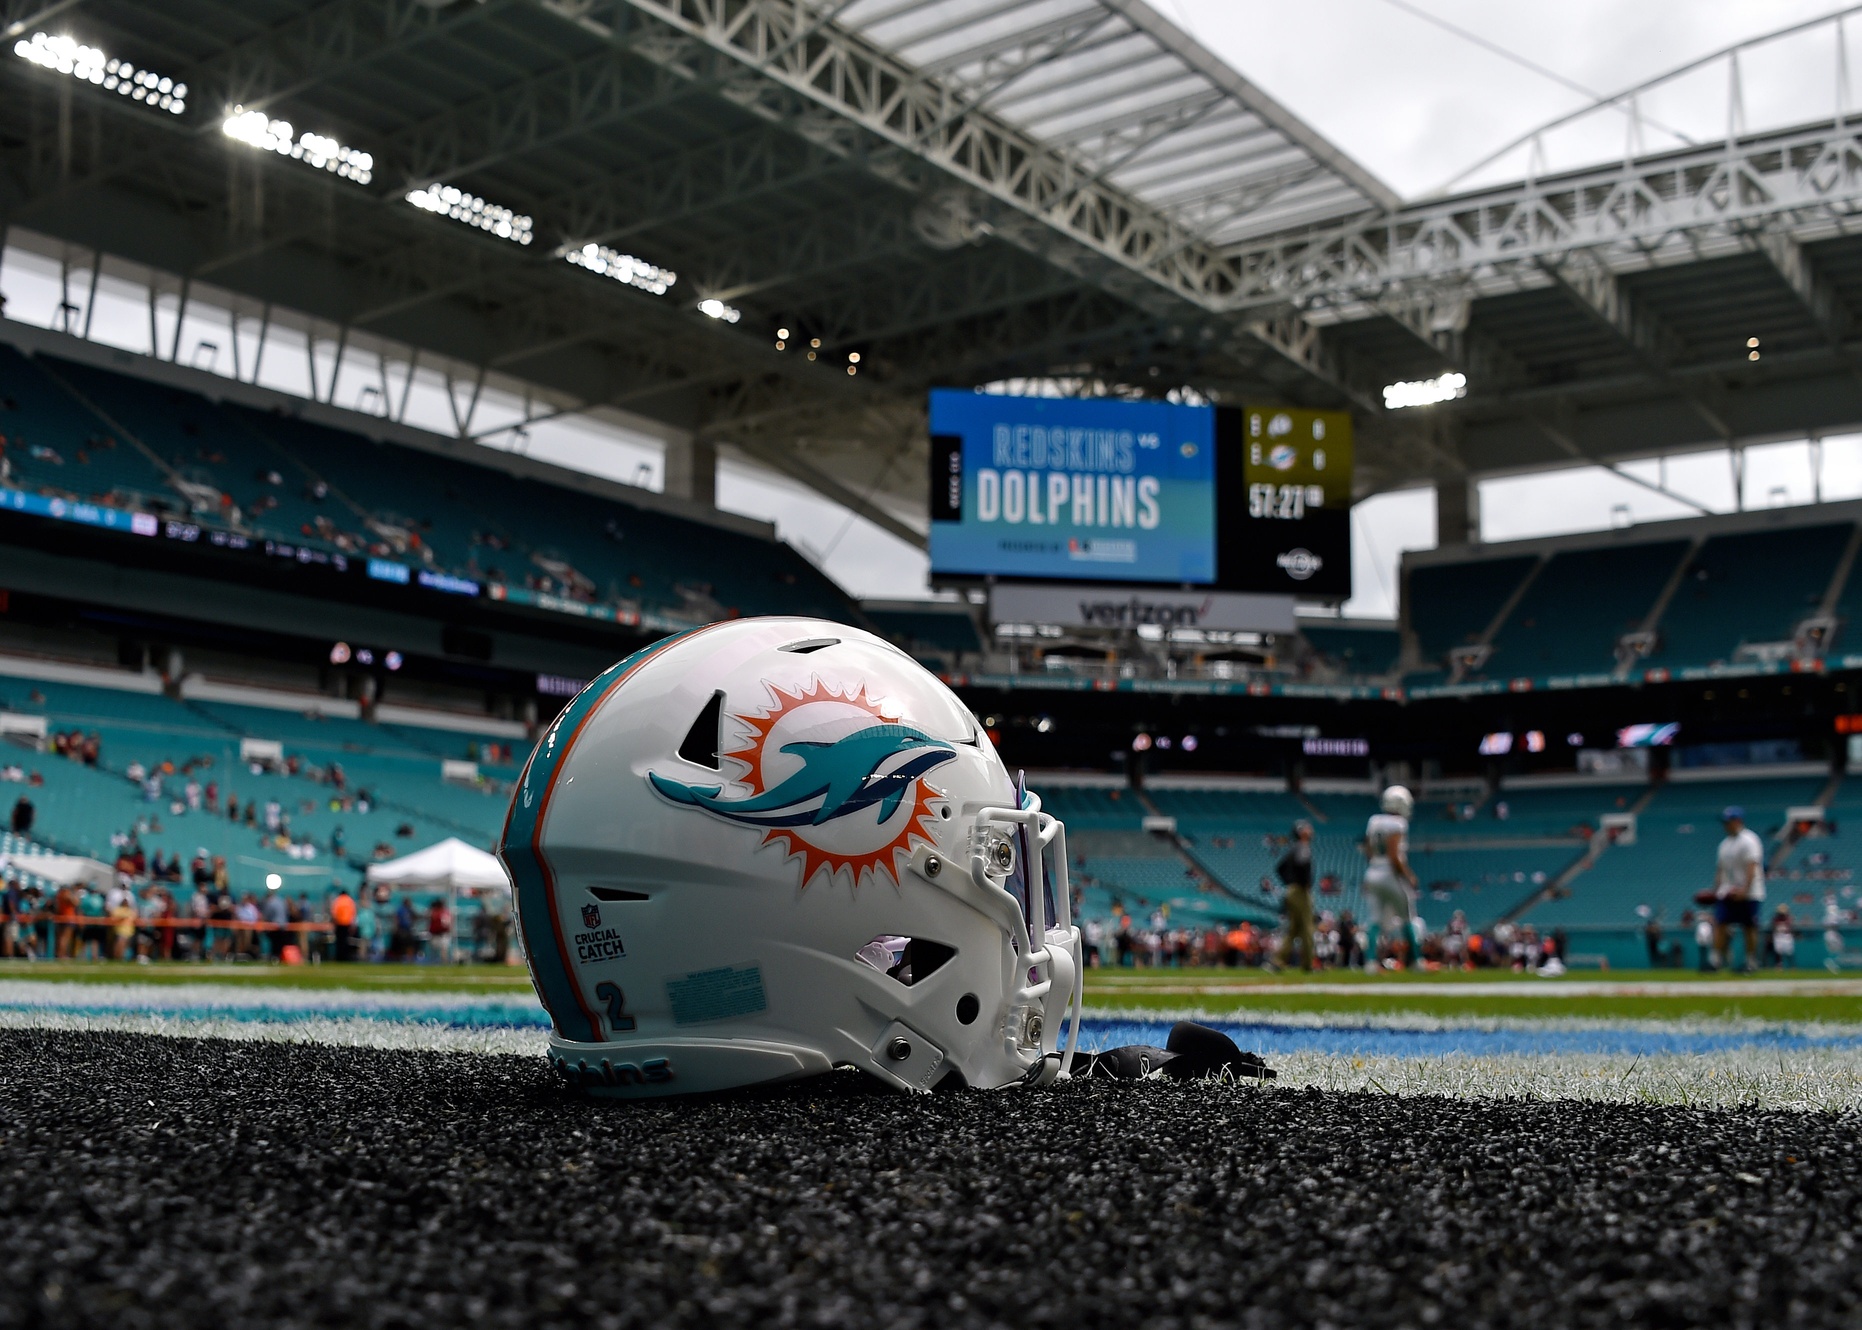 Dolphins helmet on field before game